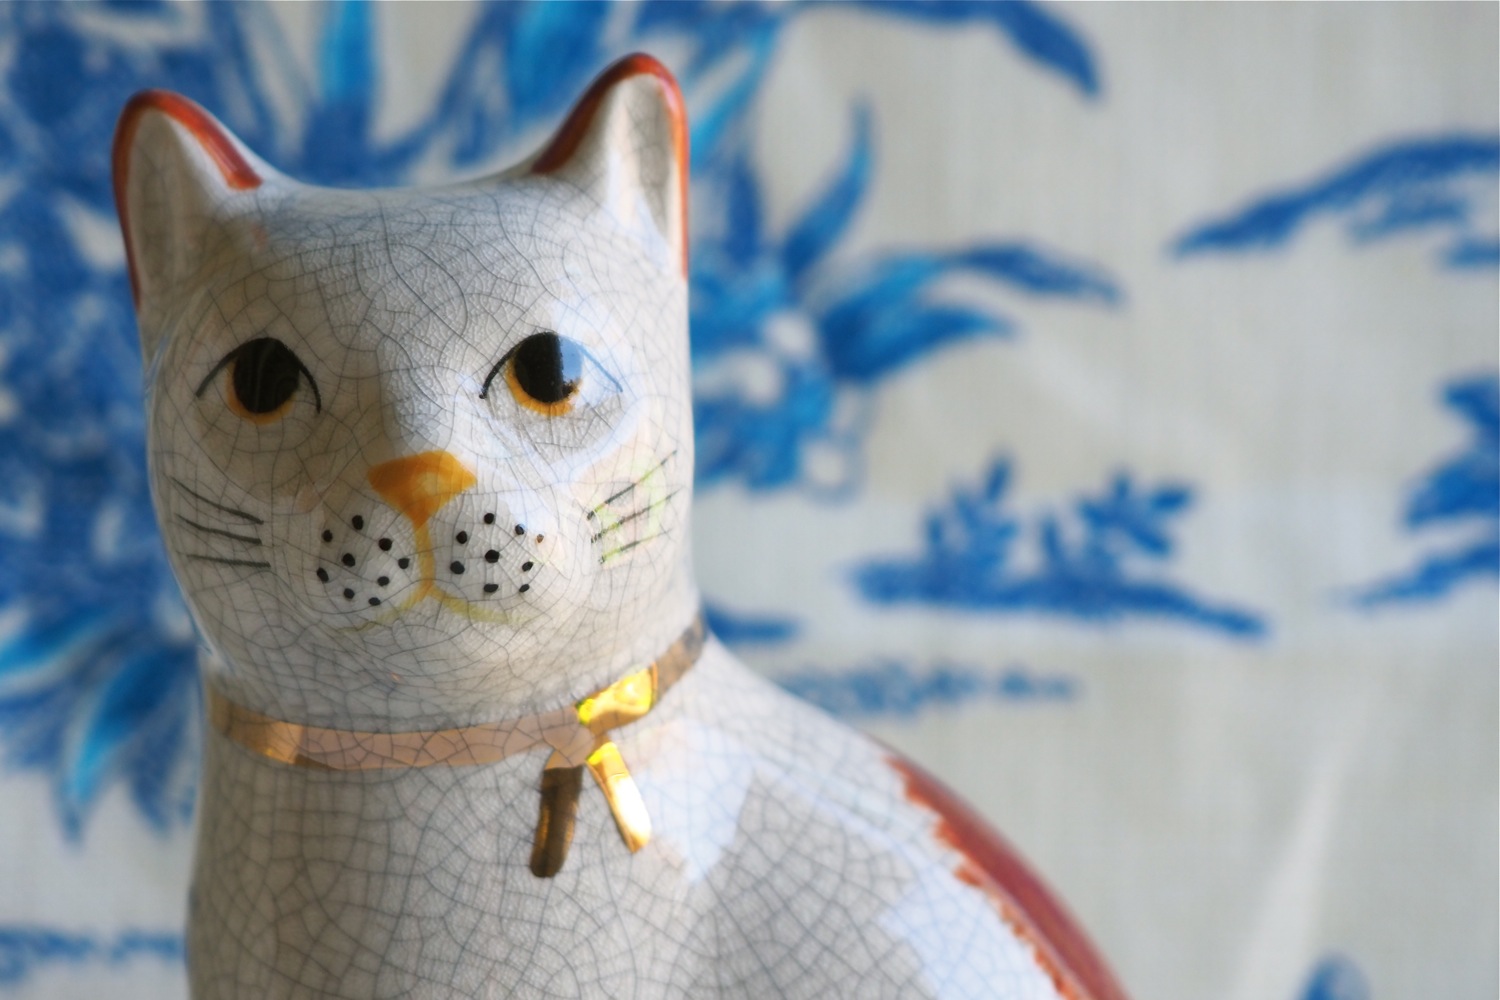 flatten the curve, flatten the coronavirus curve, flatten the COVID-19 curve, flatten the coronavirus COVID-19 curve, coronavirus pandemic 2020, Vintage Finds Fitz and Floyd Mantle Cats, Vintage Fitz & Floyd Japanese Ceramic Mantle Cats, Chinoiserie mantle cats, blue and white mantle cats, vintage chinoiserie blue and white mantle cats, 